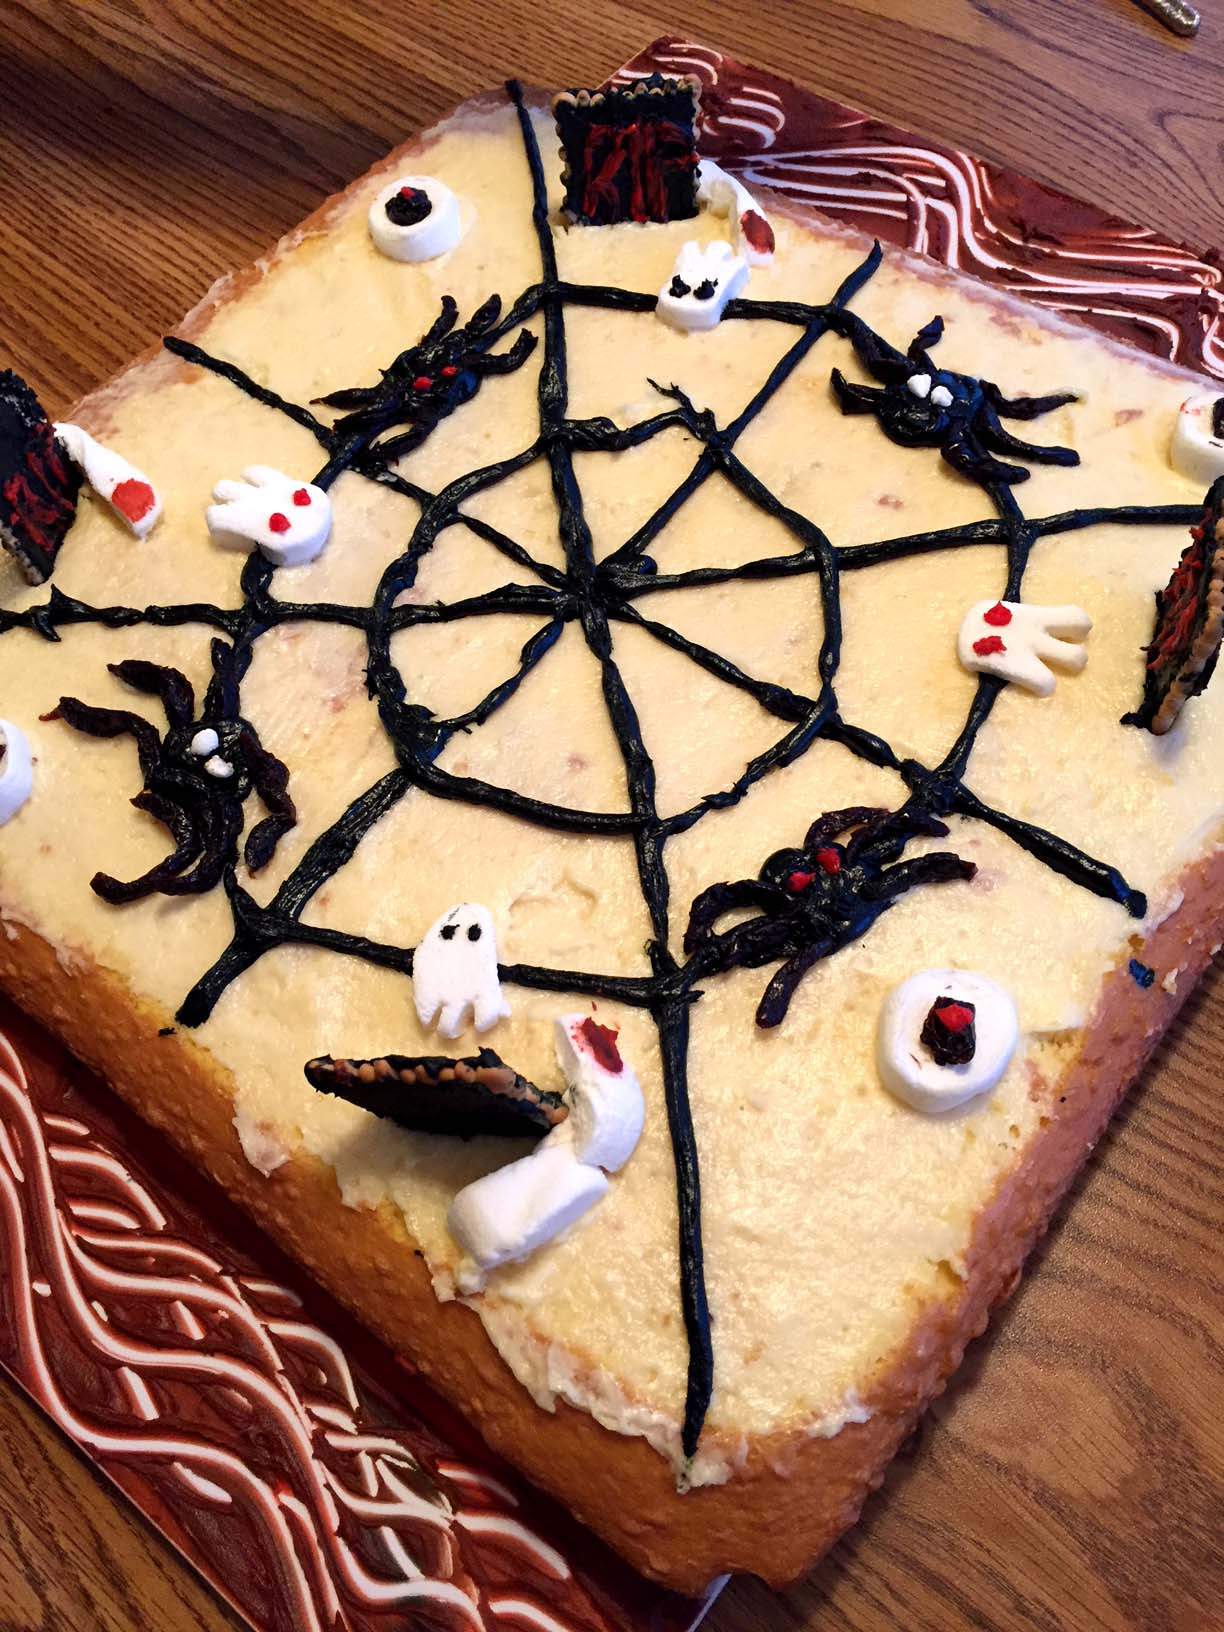 Cakes For Halloween
 Easy Halloween Cake Decorating Ideas For Spooky Cake